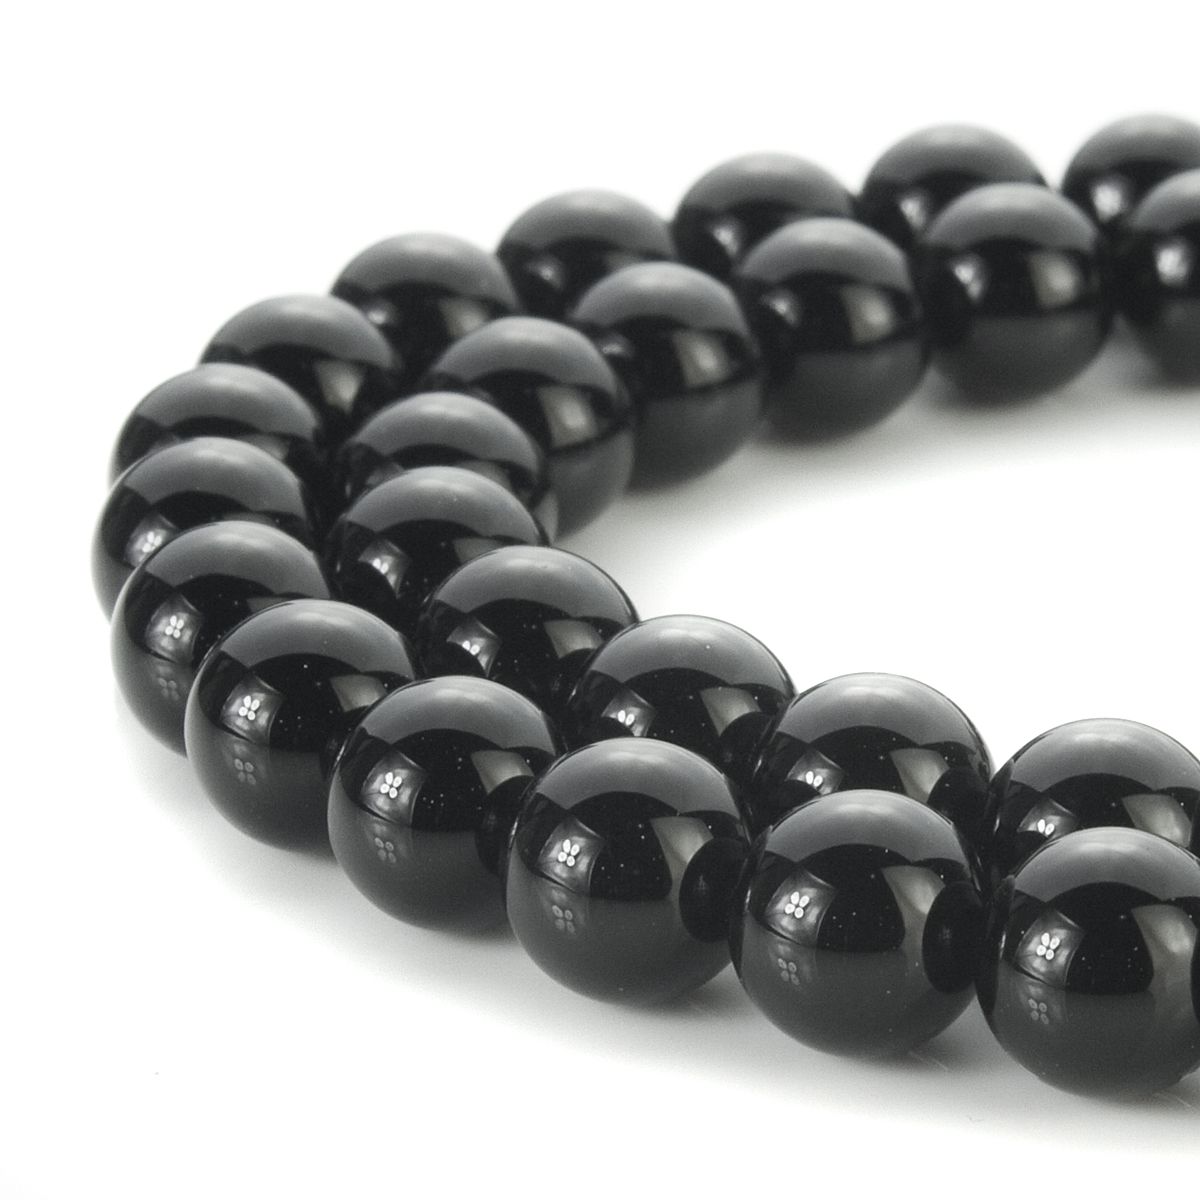 Naturel Noir Agate Onyx Faceted Round Loose Spacer Beads For Jewelry Making 15" 